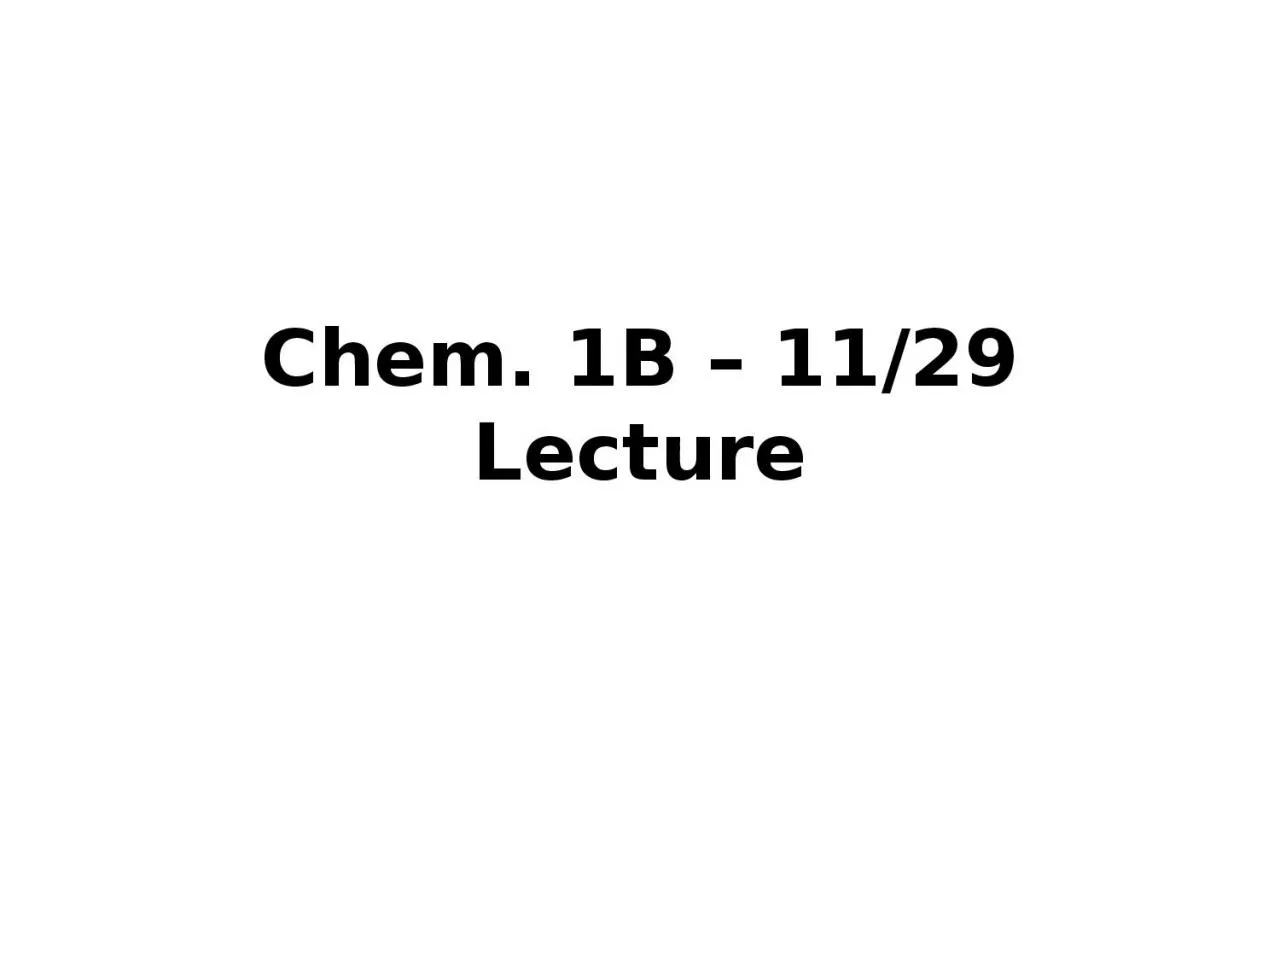 Chem. 1B – 11/29 Lecture